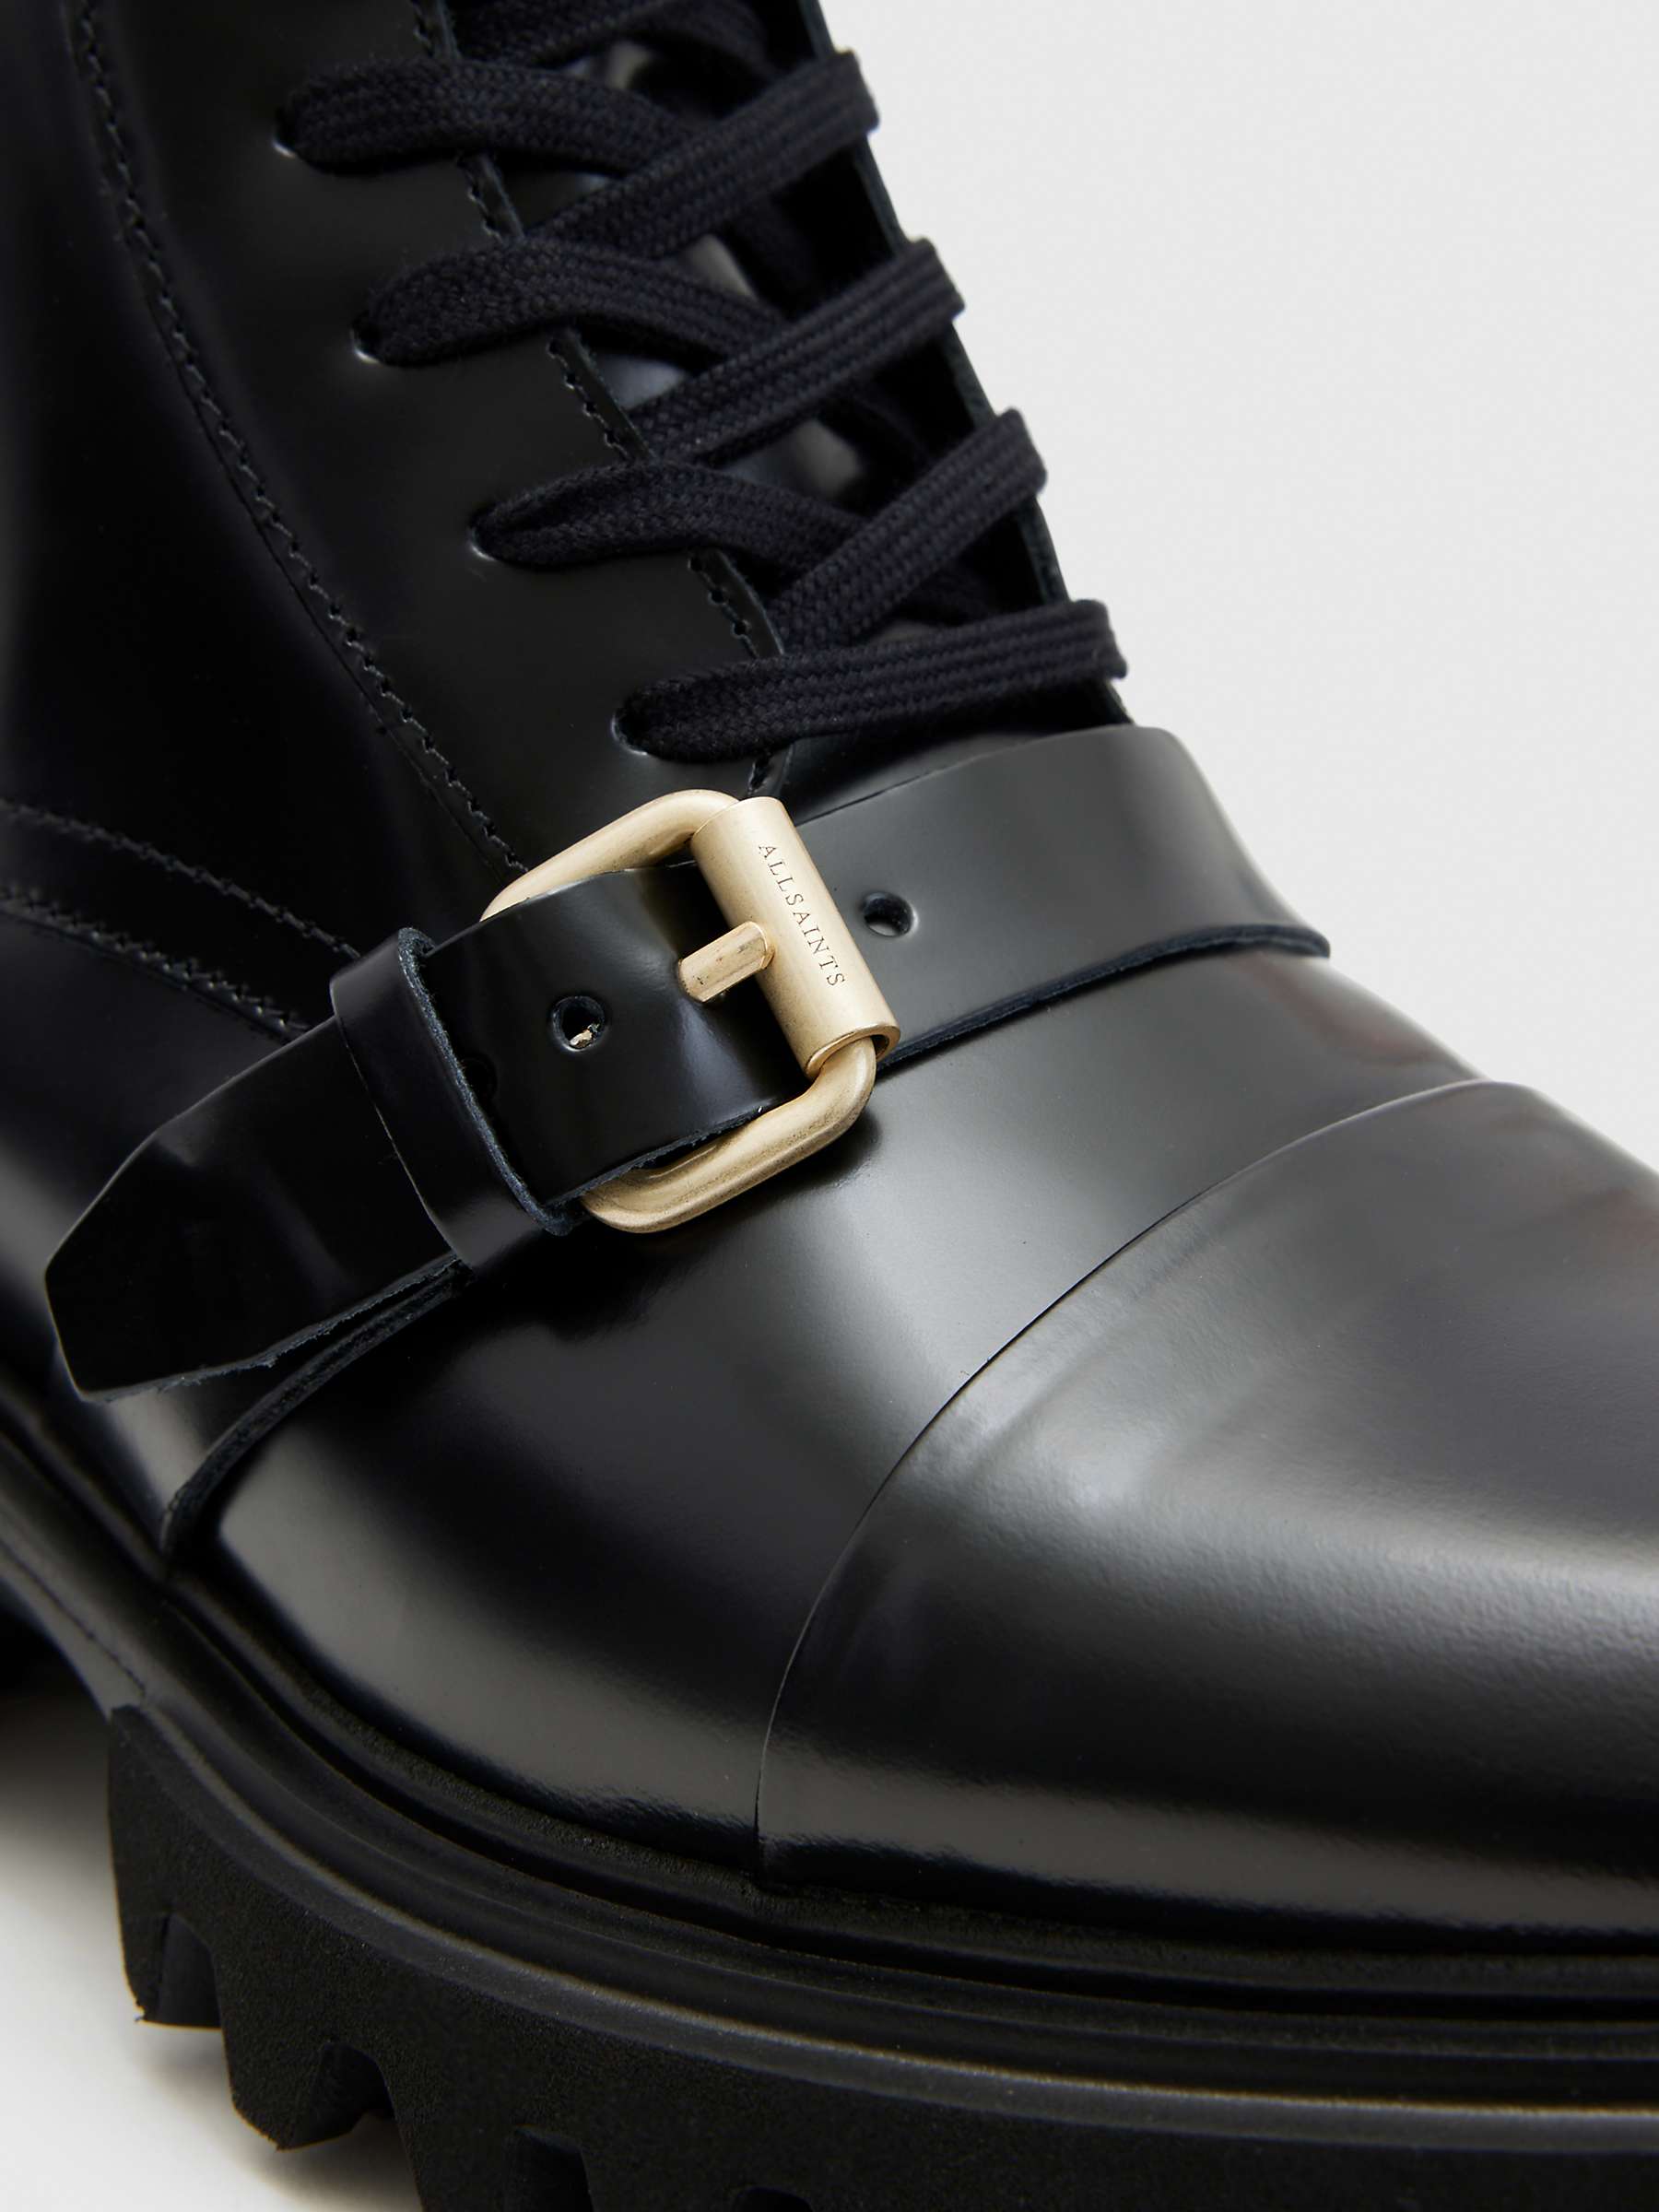 Buy AllSaints Tori Leather Lace Up Ankle Boots, Black/Warm Brass Online at johnlewis.com